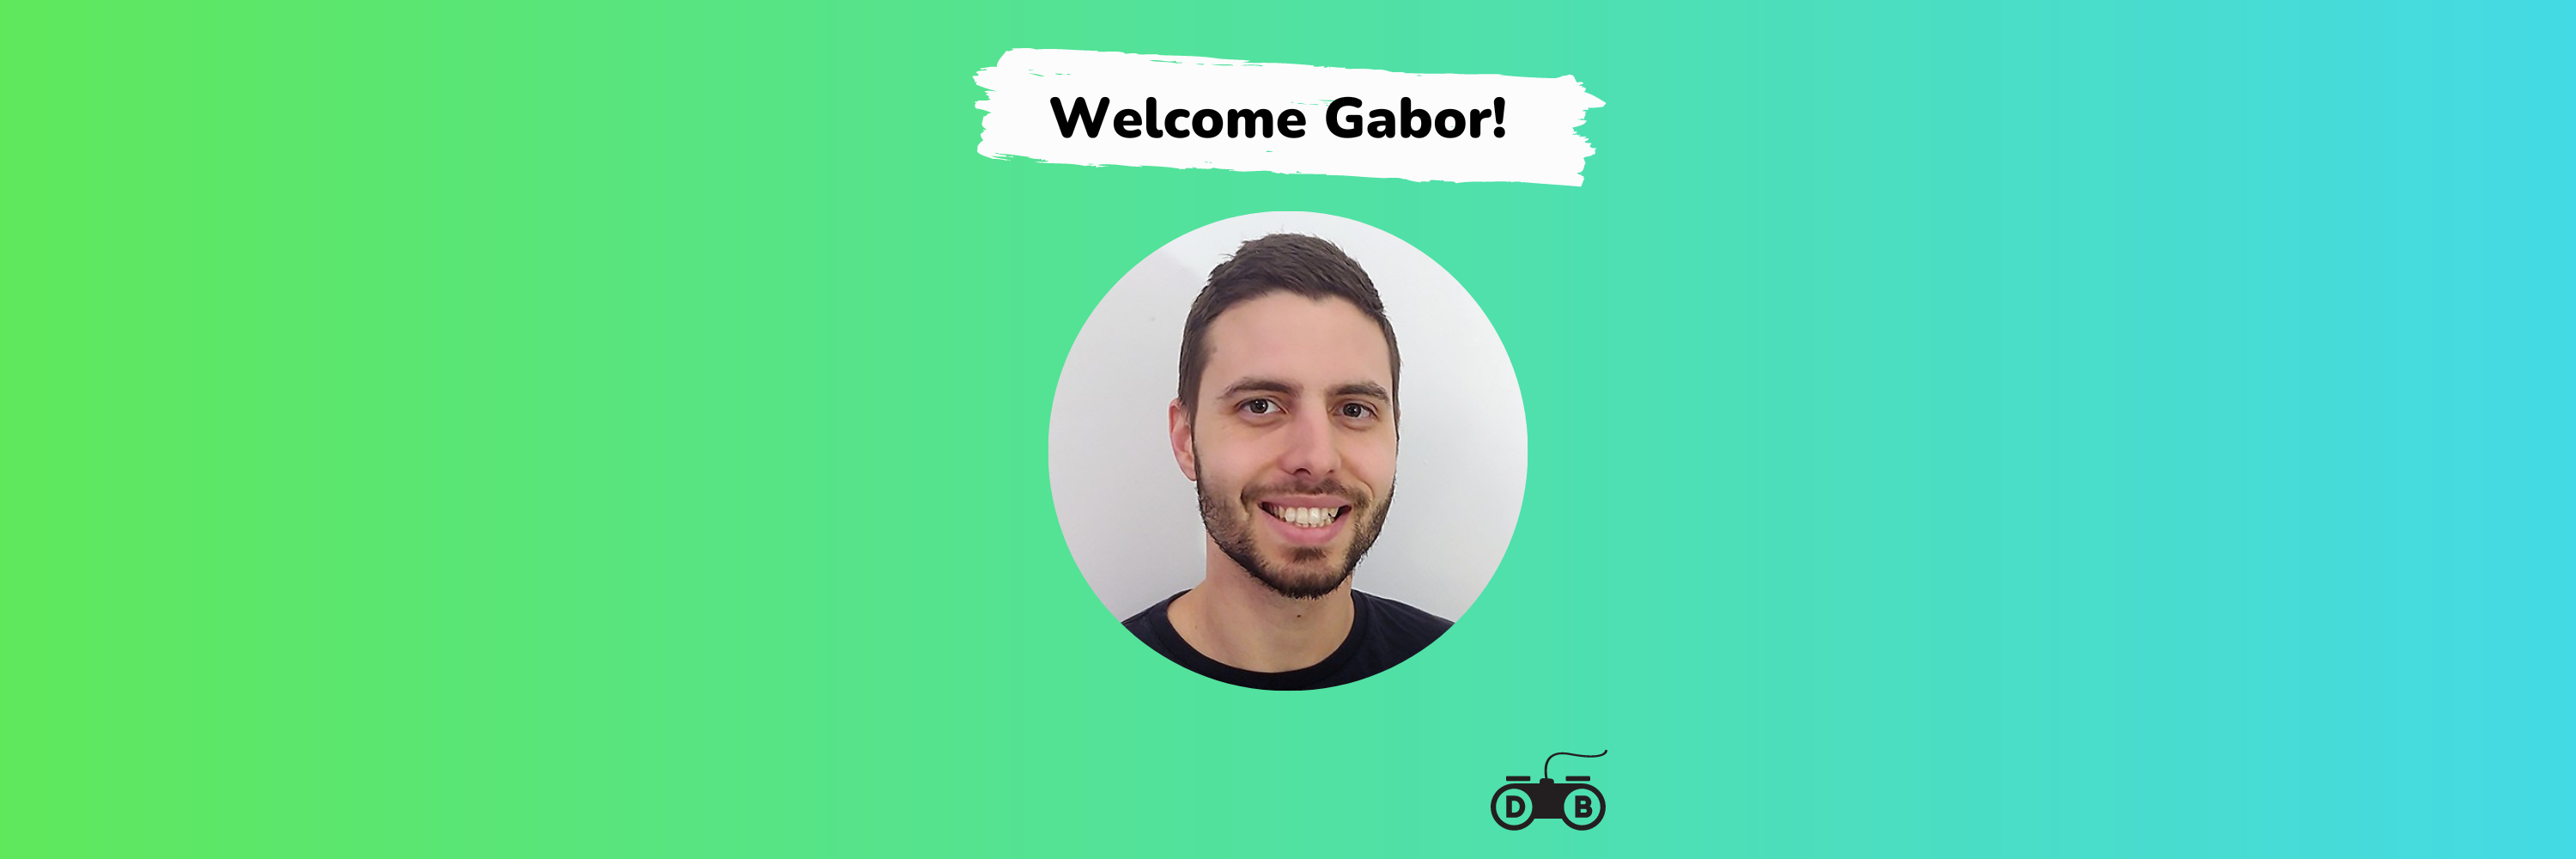 Welcome Gabor